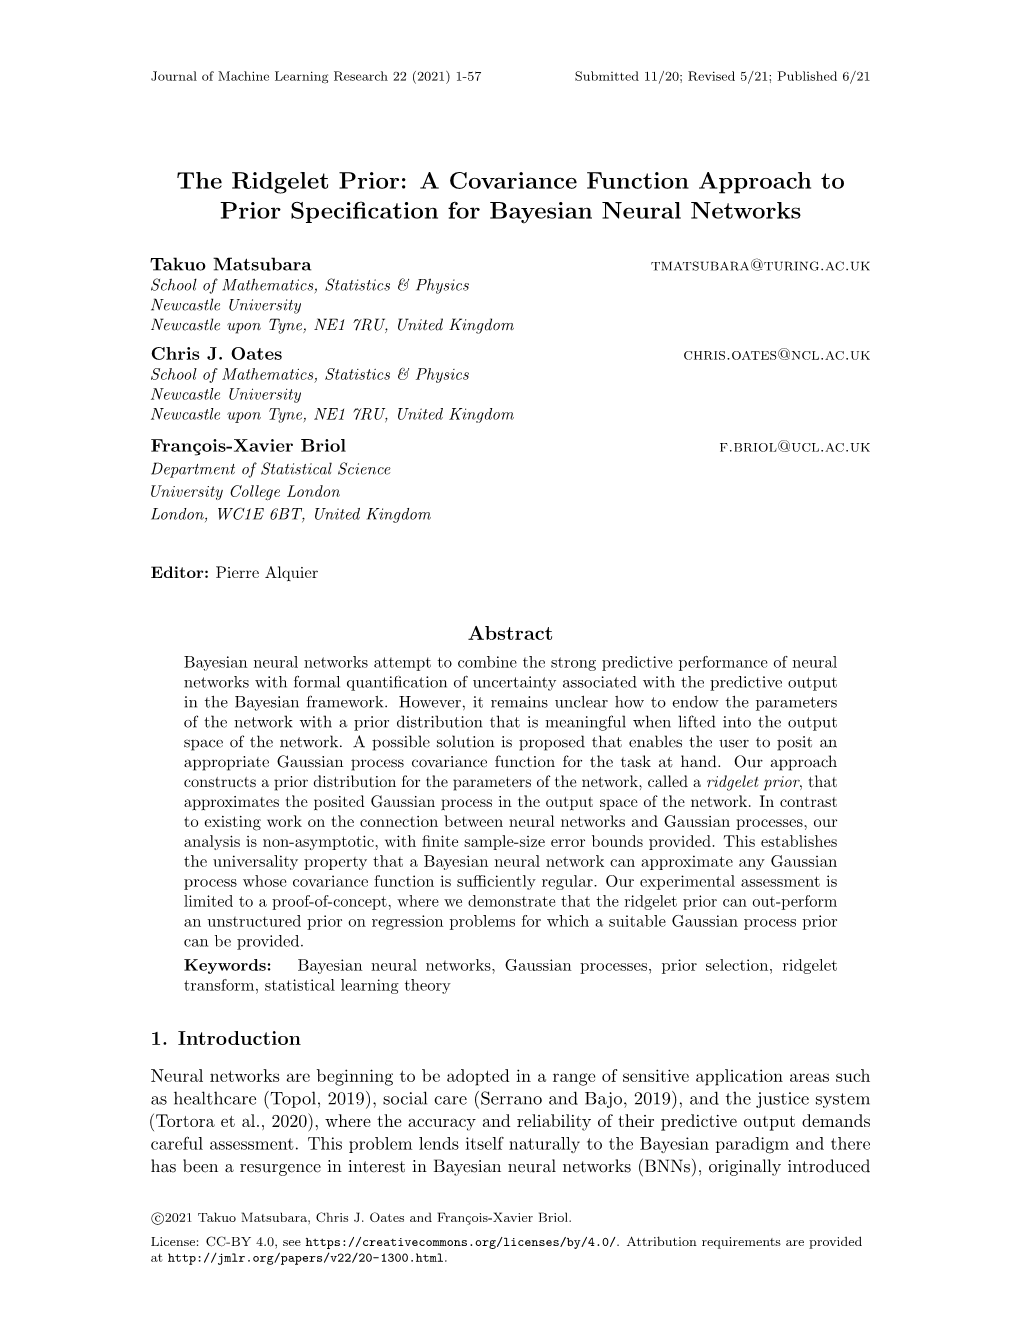 A Covariance Function Approach to Prior Specification for Bayesian